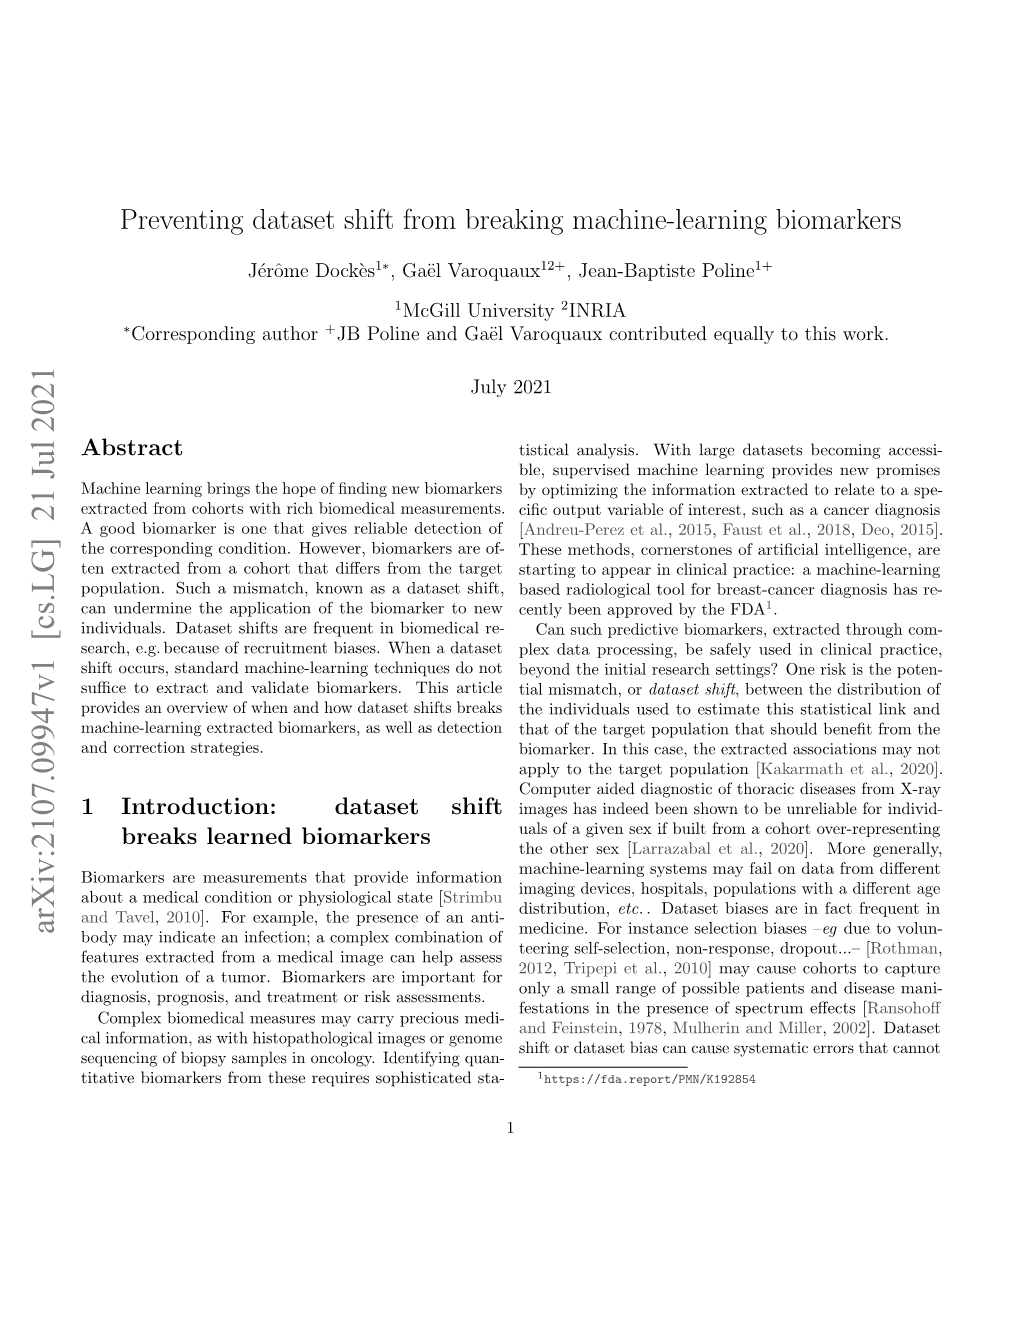 Preventing Dataset Shift from Breaking Machine-Learning Biomarkers